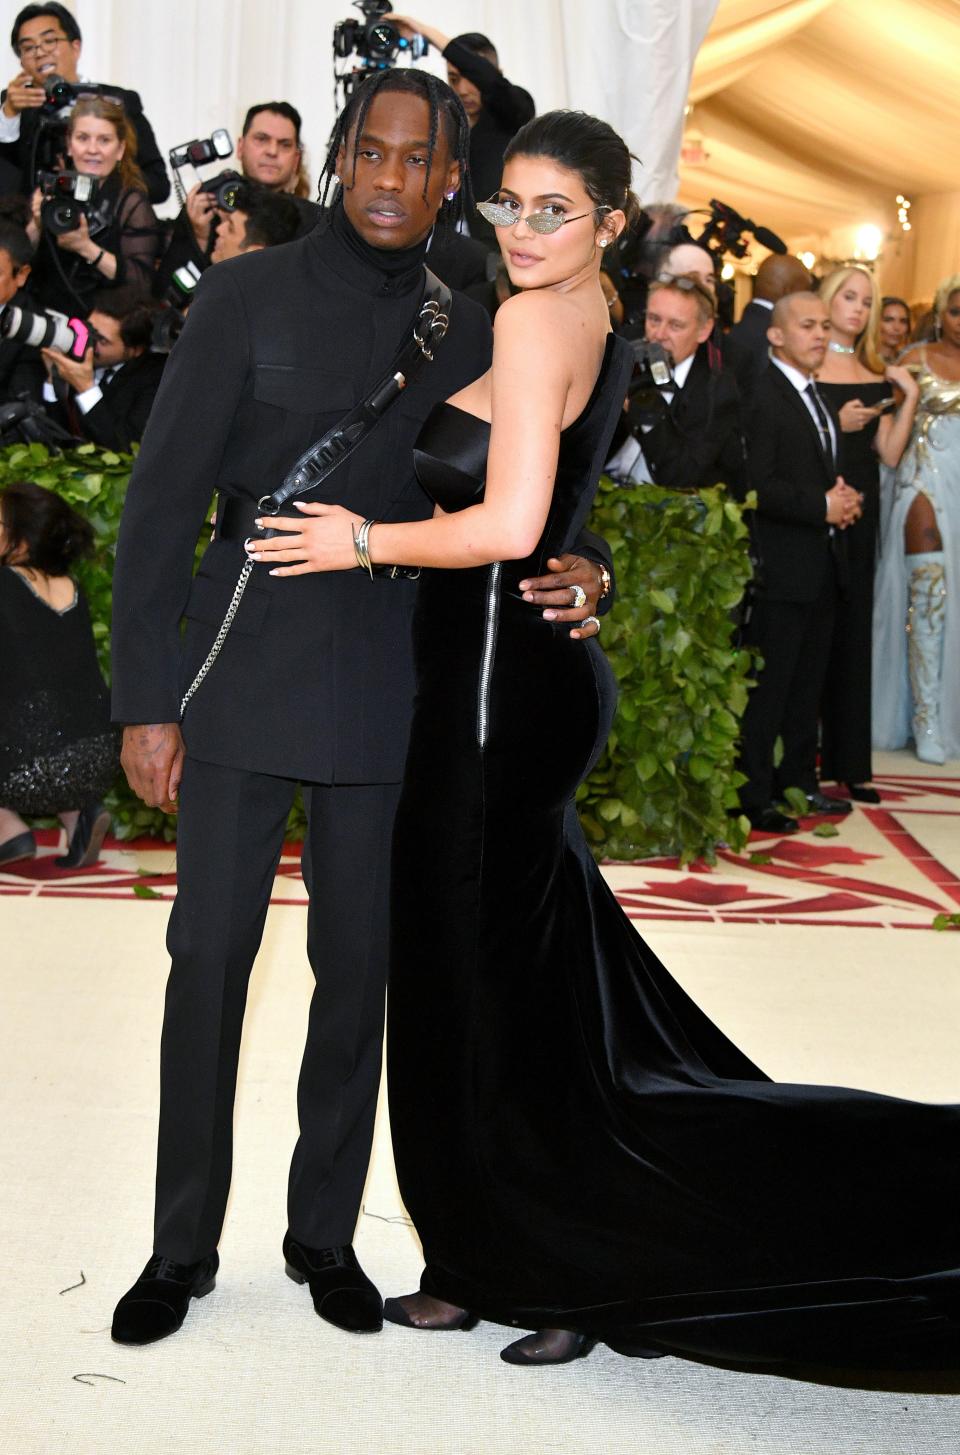 <h1 class="title">Travis Scott in Christian Louboutin shoes and Kylie Jenner in Alexander Wang and Chopard jewelry</h1><cite class="credit">Photo: Getty Images</cite>